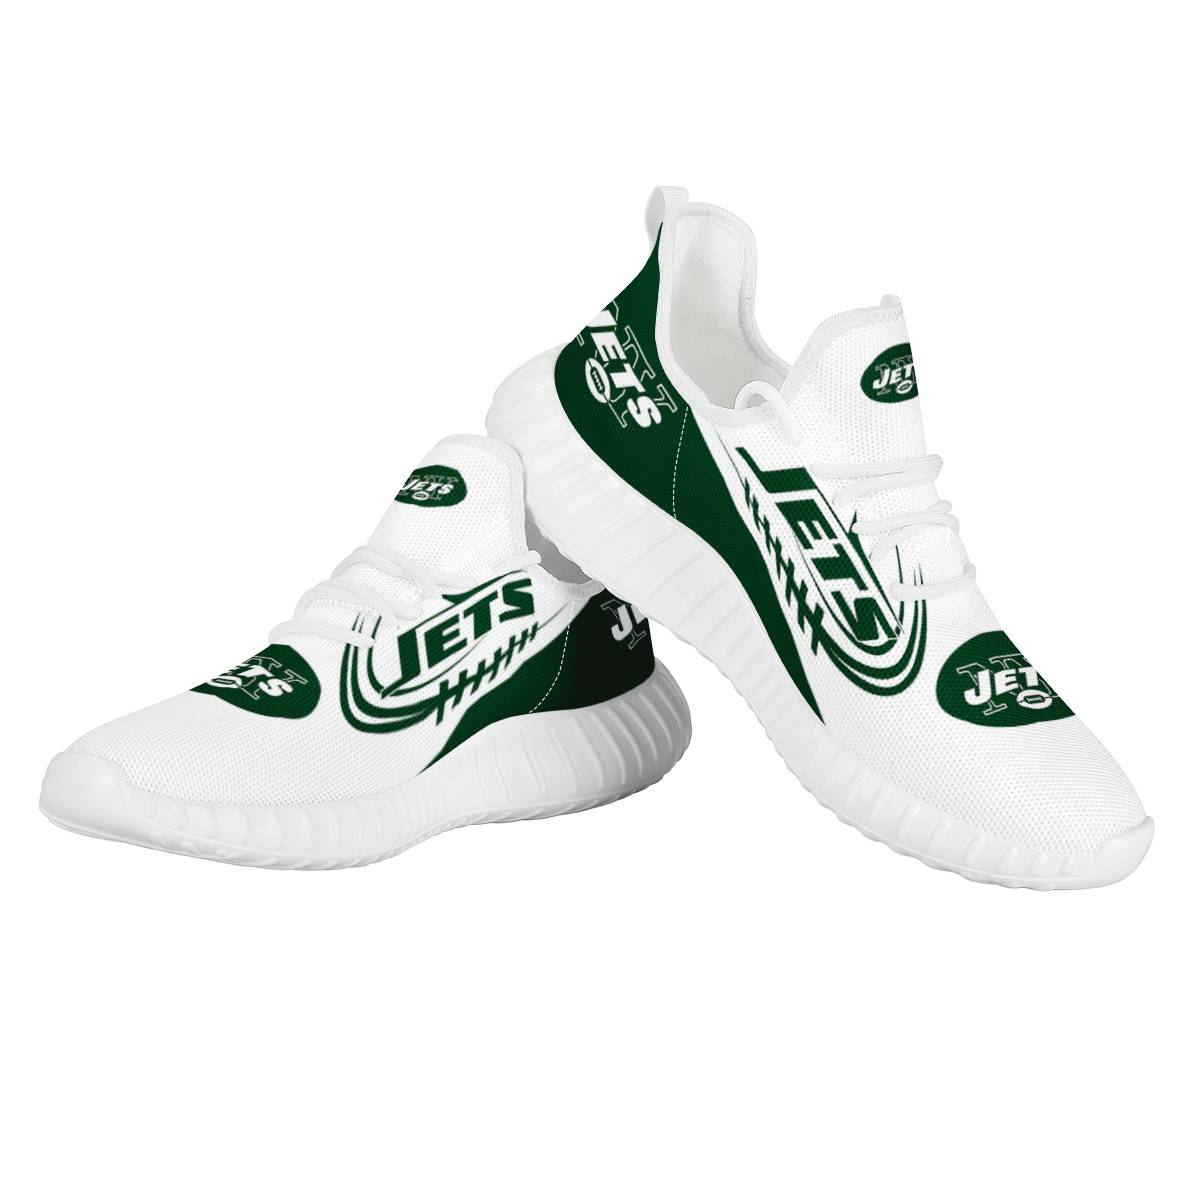 Women's NFL New York Jets Mesh Knit Sneakers/Shoes 004